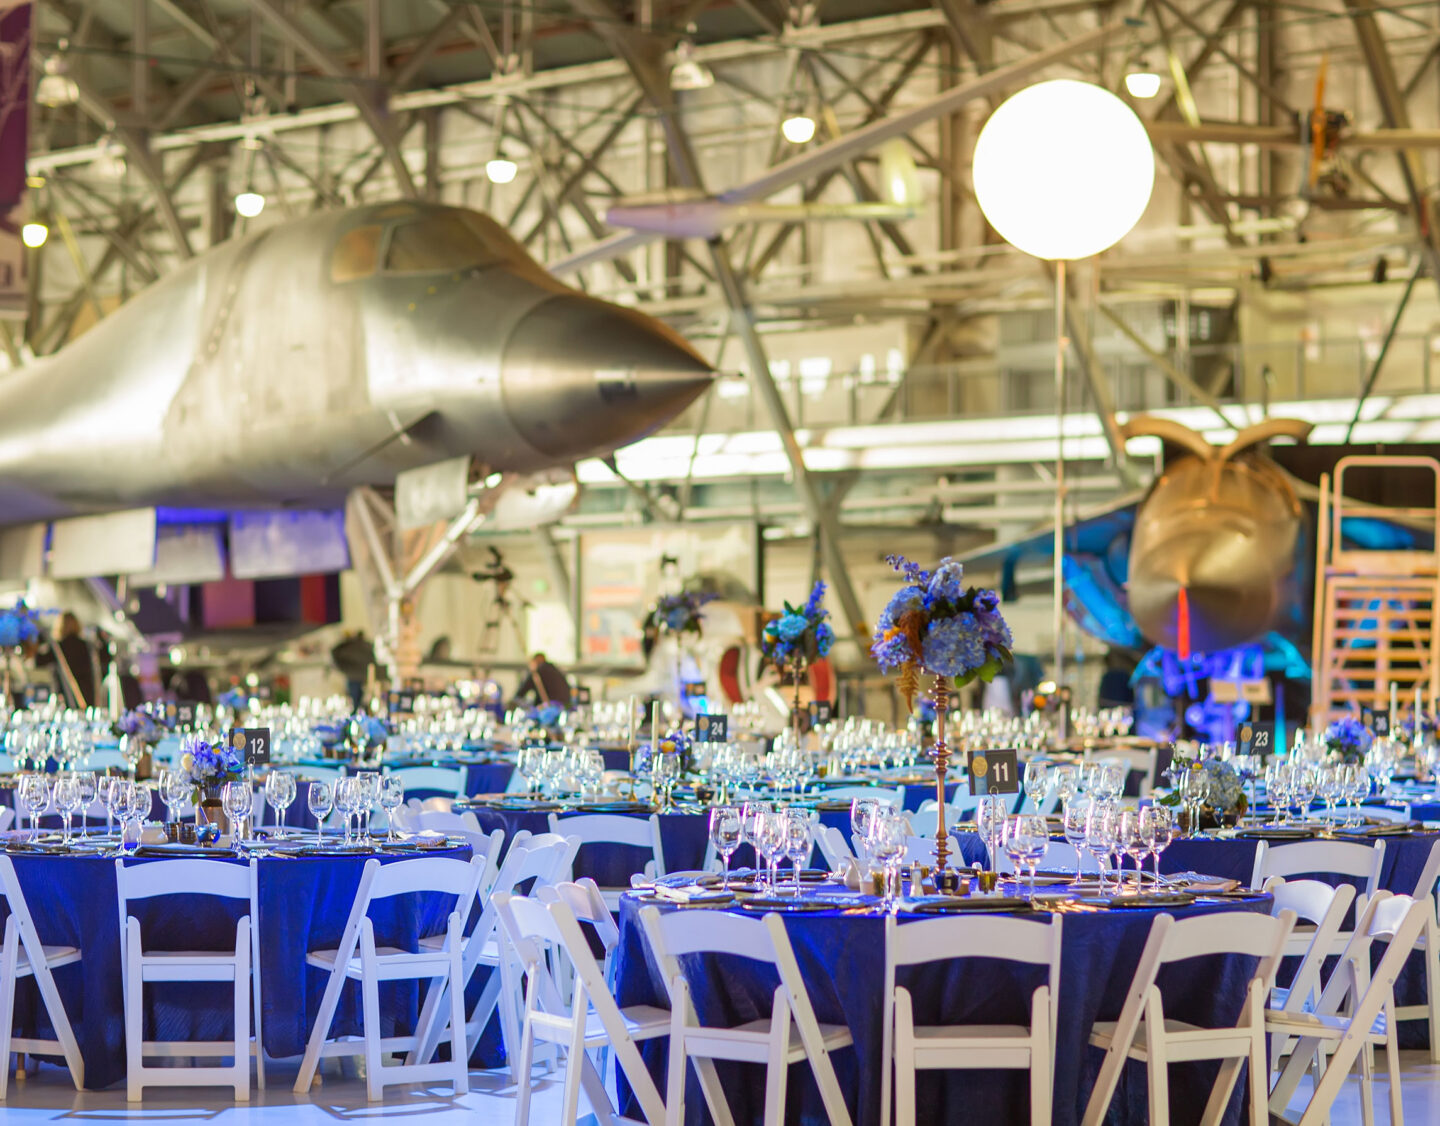 Aircraft - Private Event Setting at Wings Museum